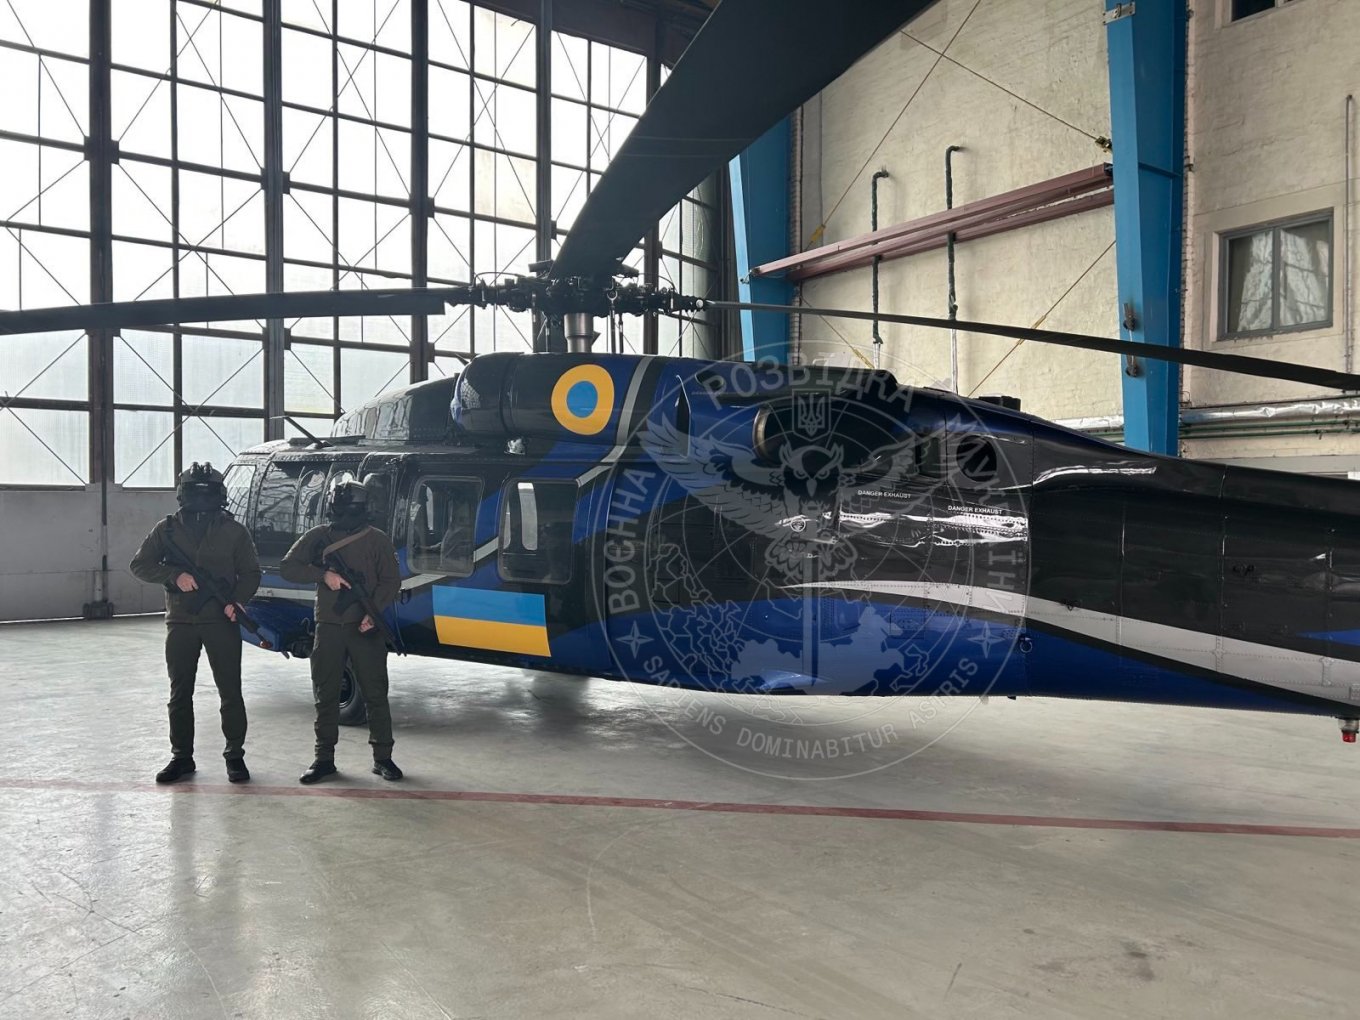 Ukrainian Black Hawk helicopter Defense Express U.S. to Provide Black Hawk Helicopters to Ecuador, Complications Arise Over the Mi-17 Helicopter Transfer to Ukraine